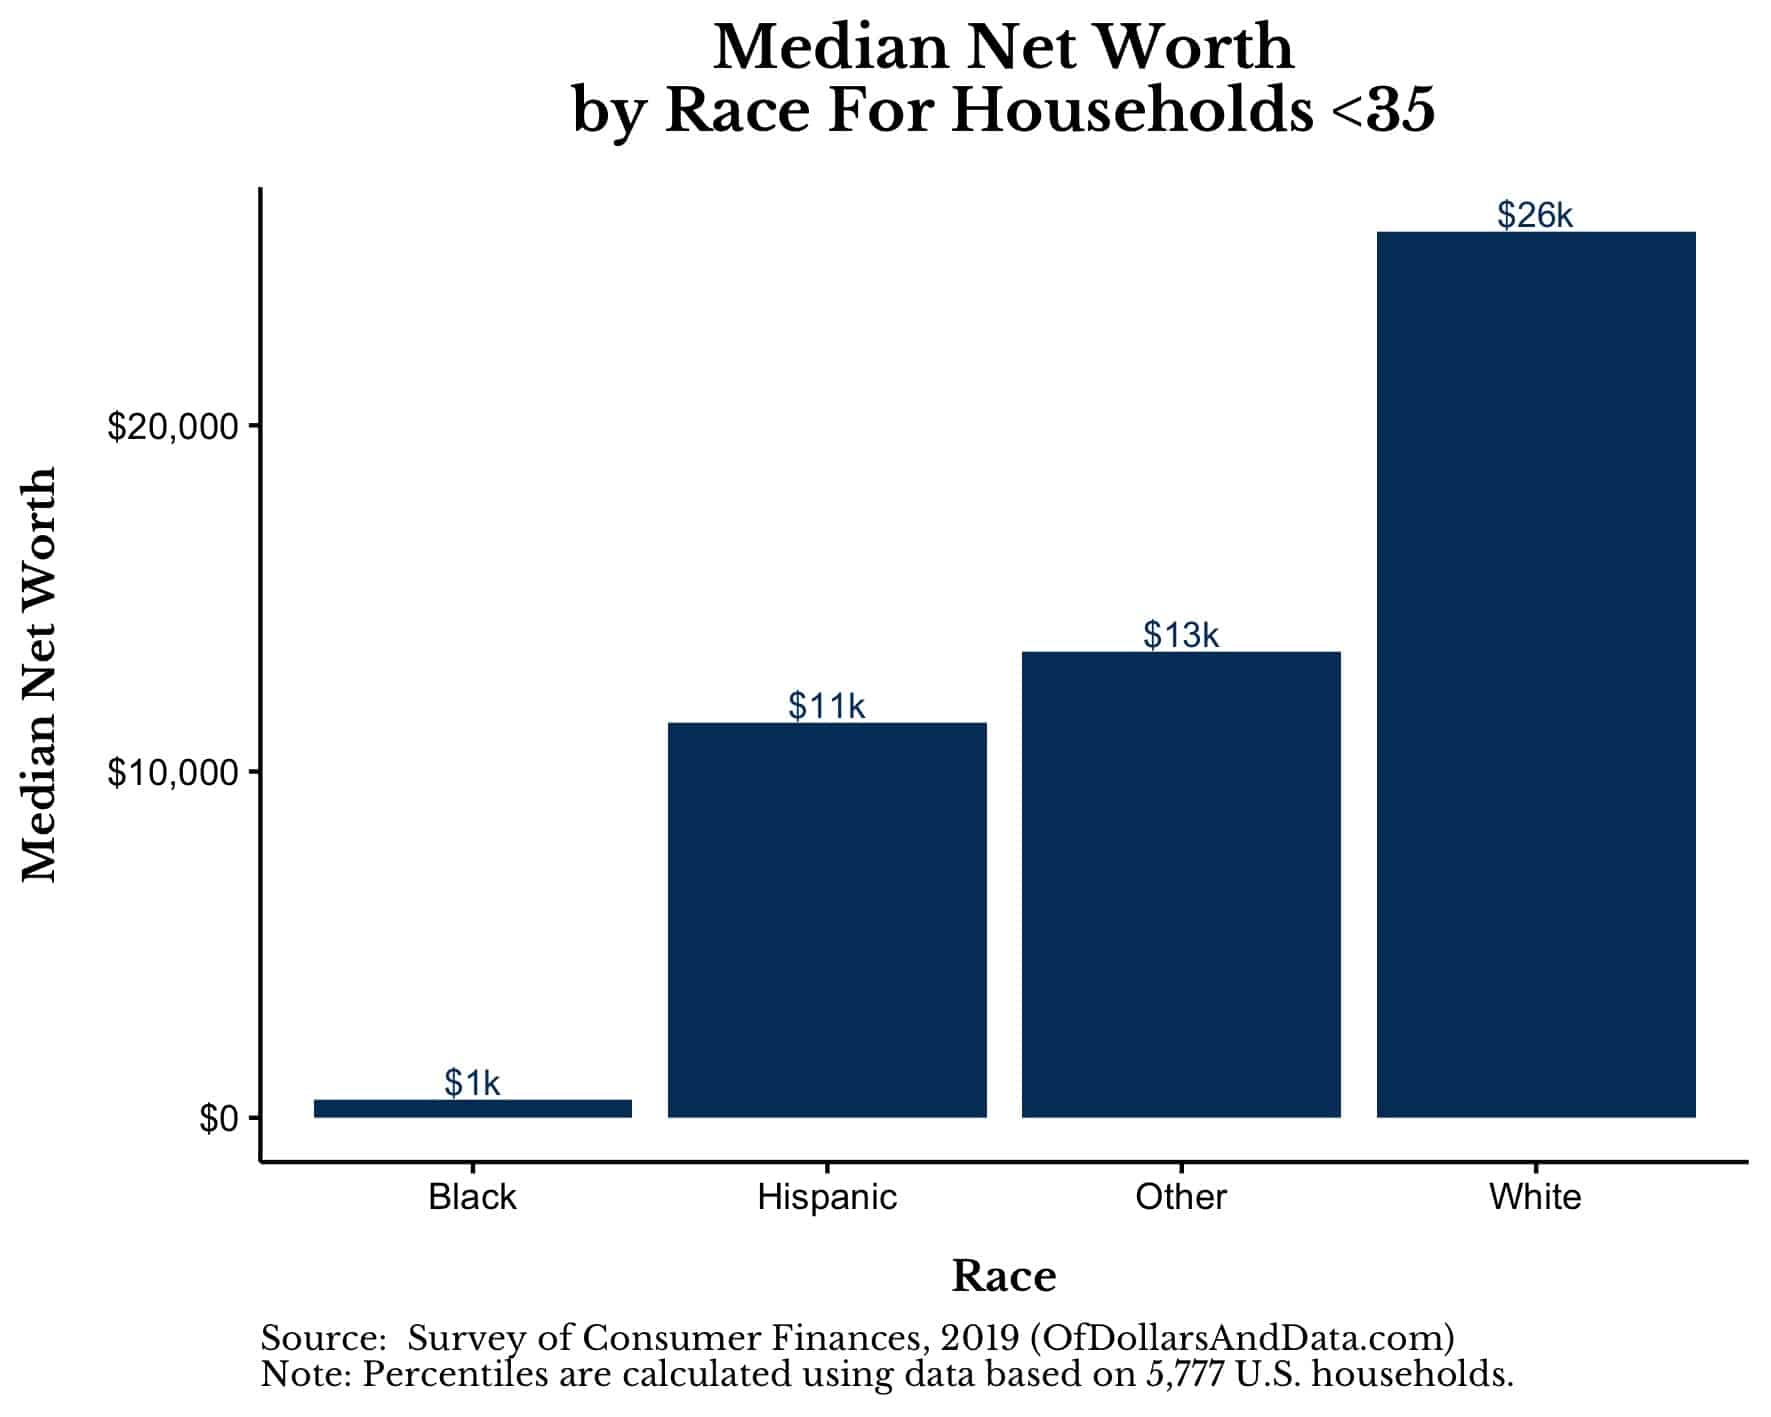 Median net worth by race for households under 35, 2019 Survey of Consumer Finances